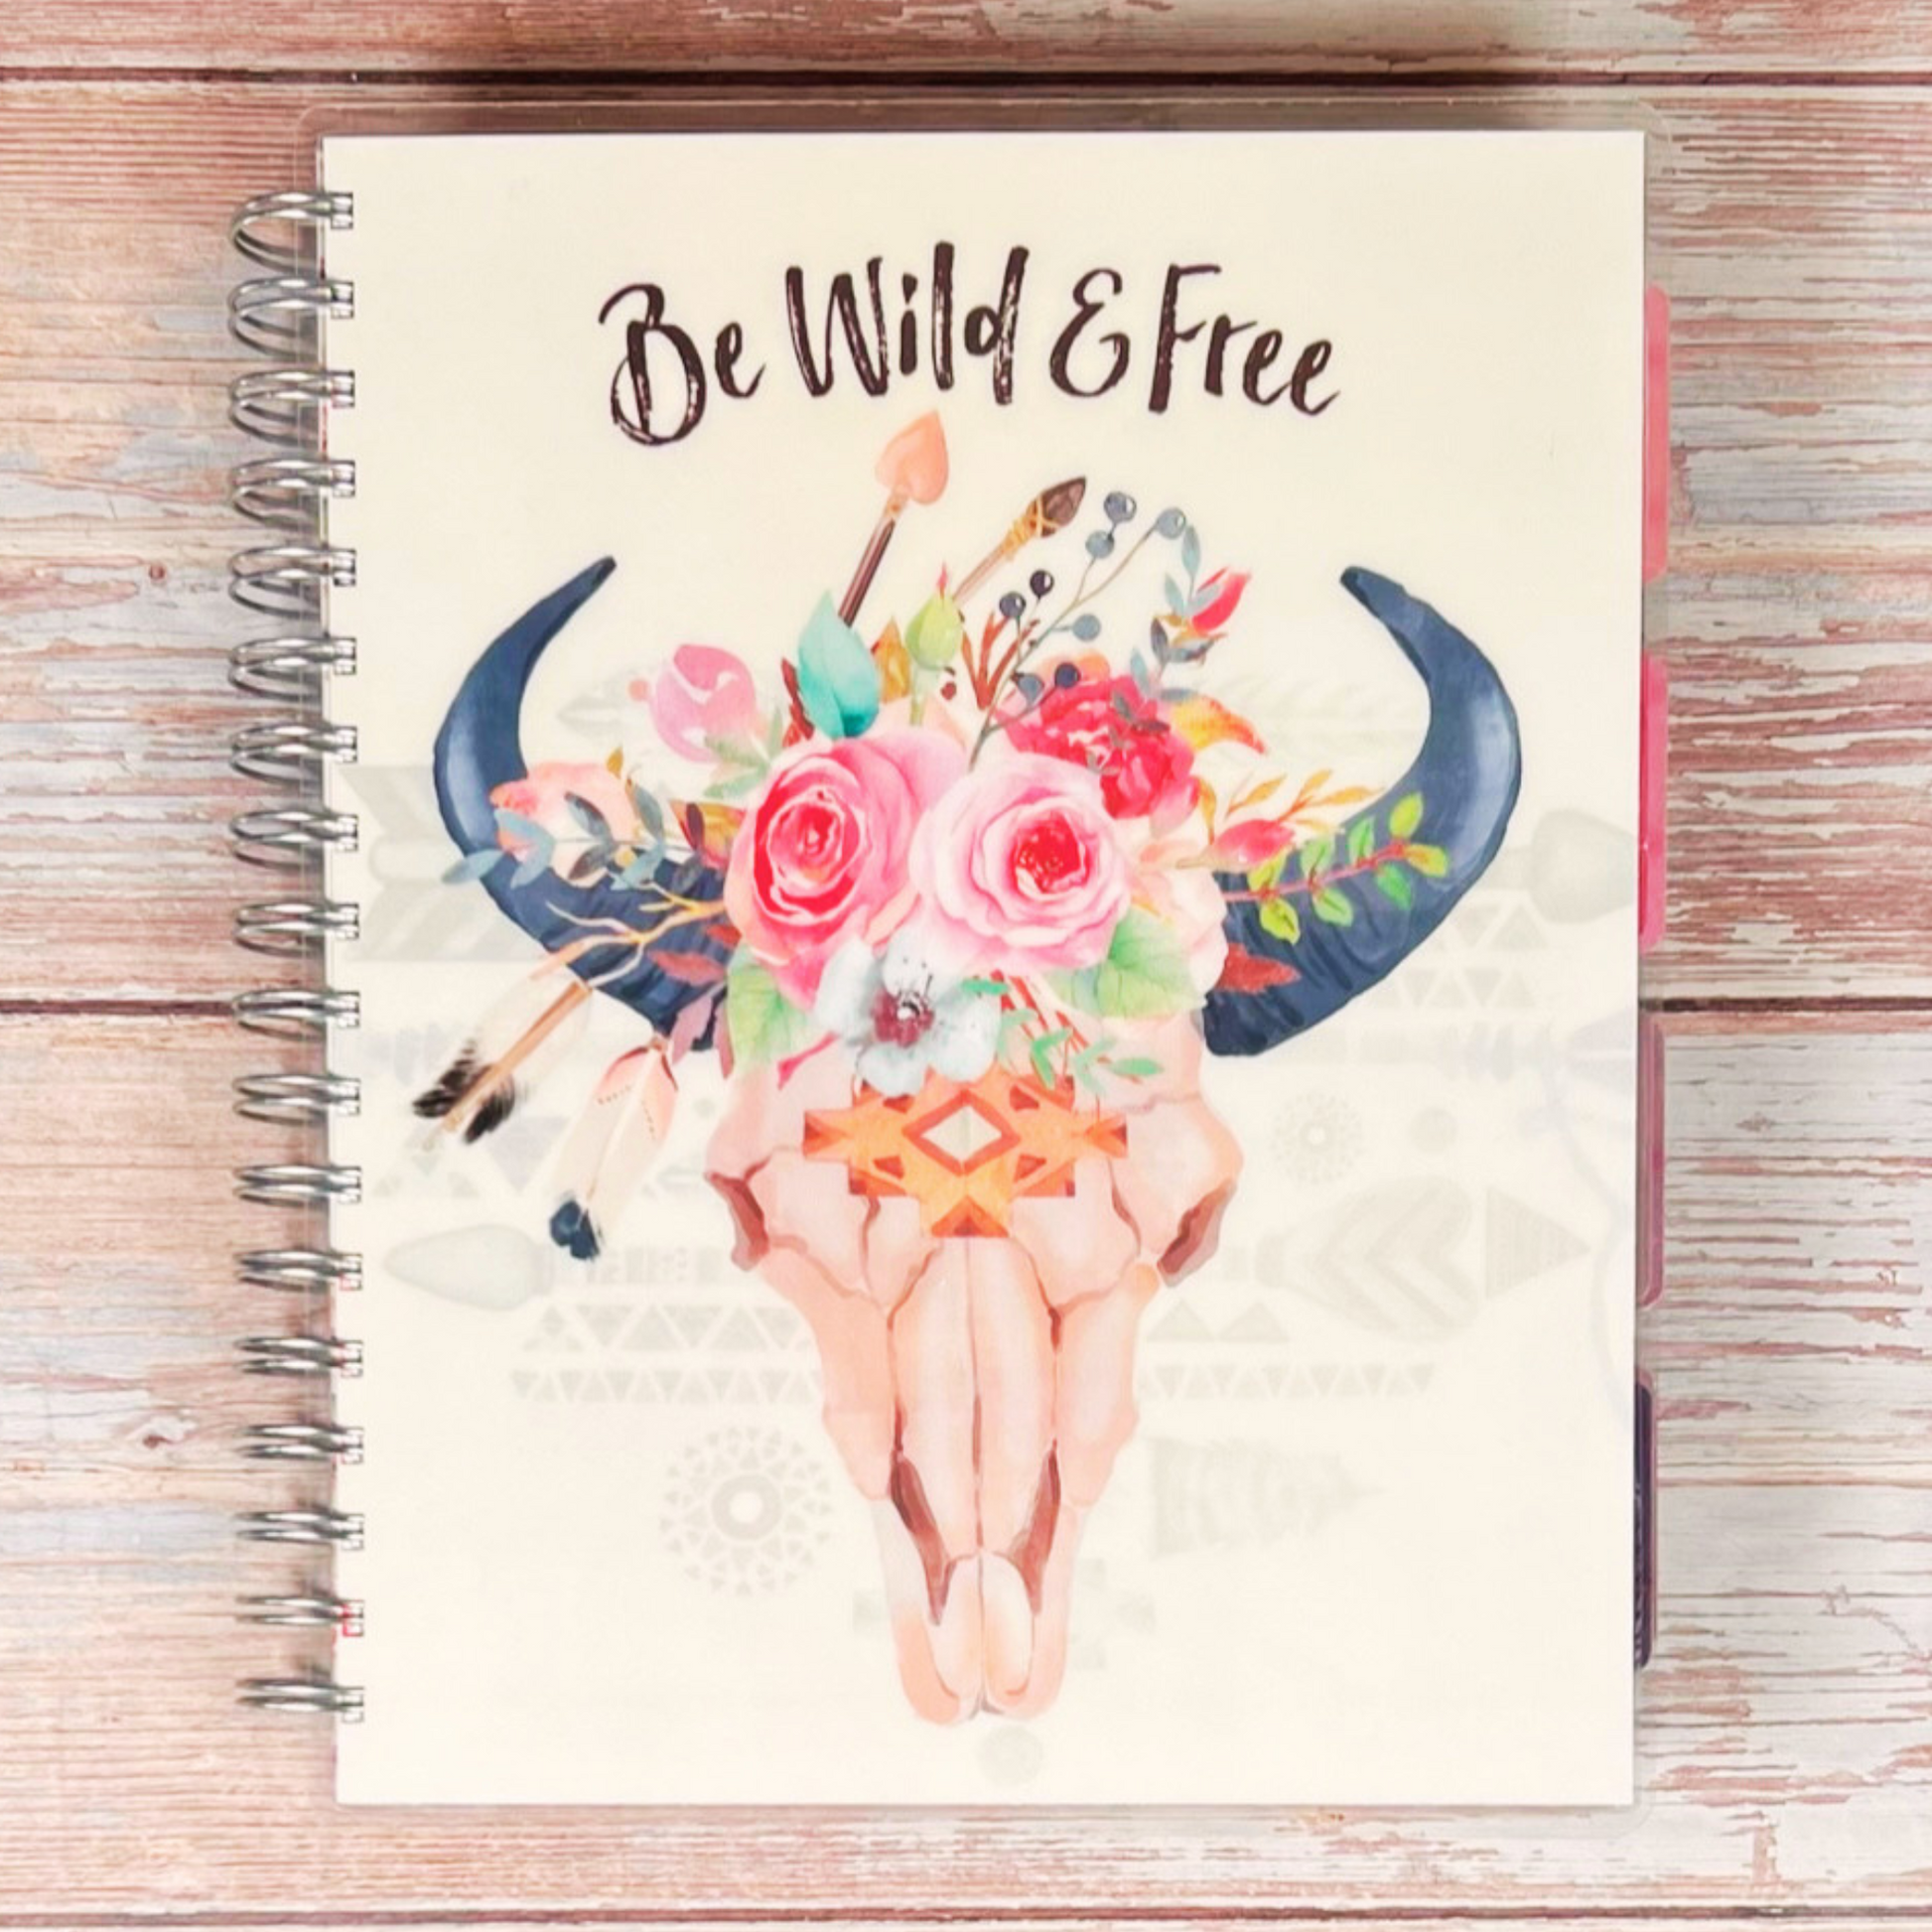 2023-2024 Personalized Monthly Planner - Wild & Free Monthly Planners Artful Planner Co. July-2023 20 Meal Planner Pages added to back +$3.00 